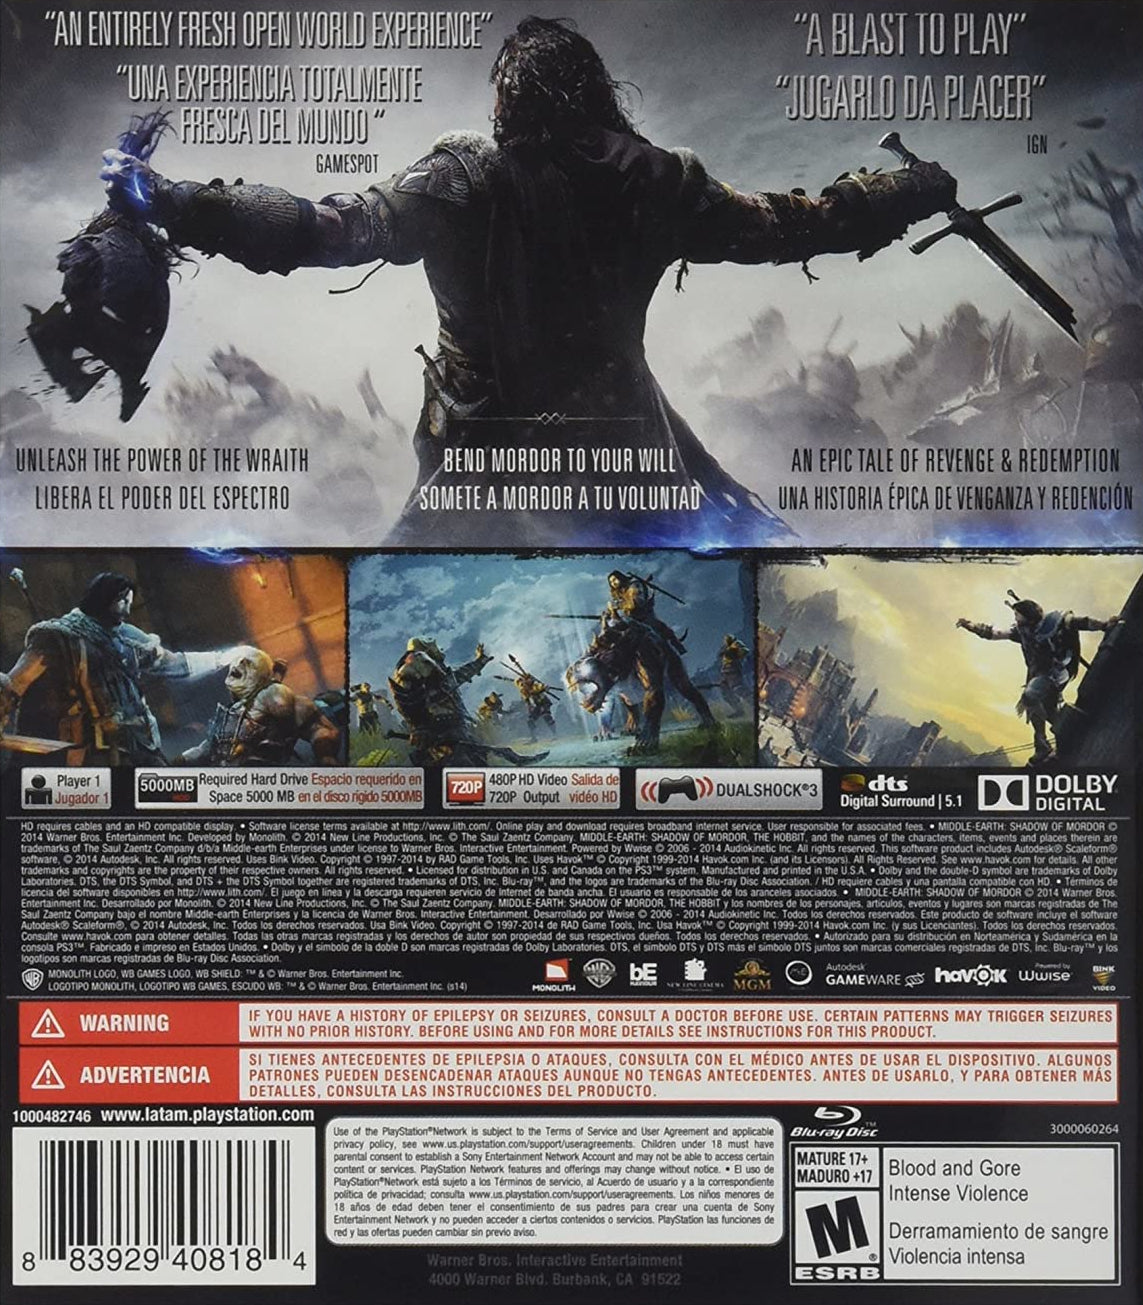 Middle Earth: Shadow of Mordor - (PS3) PlayStation 3 [Pre-Owned] Video Games Codemasters   